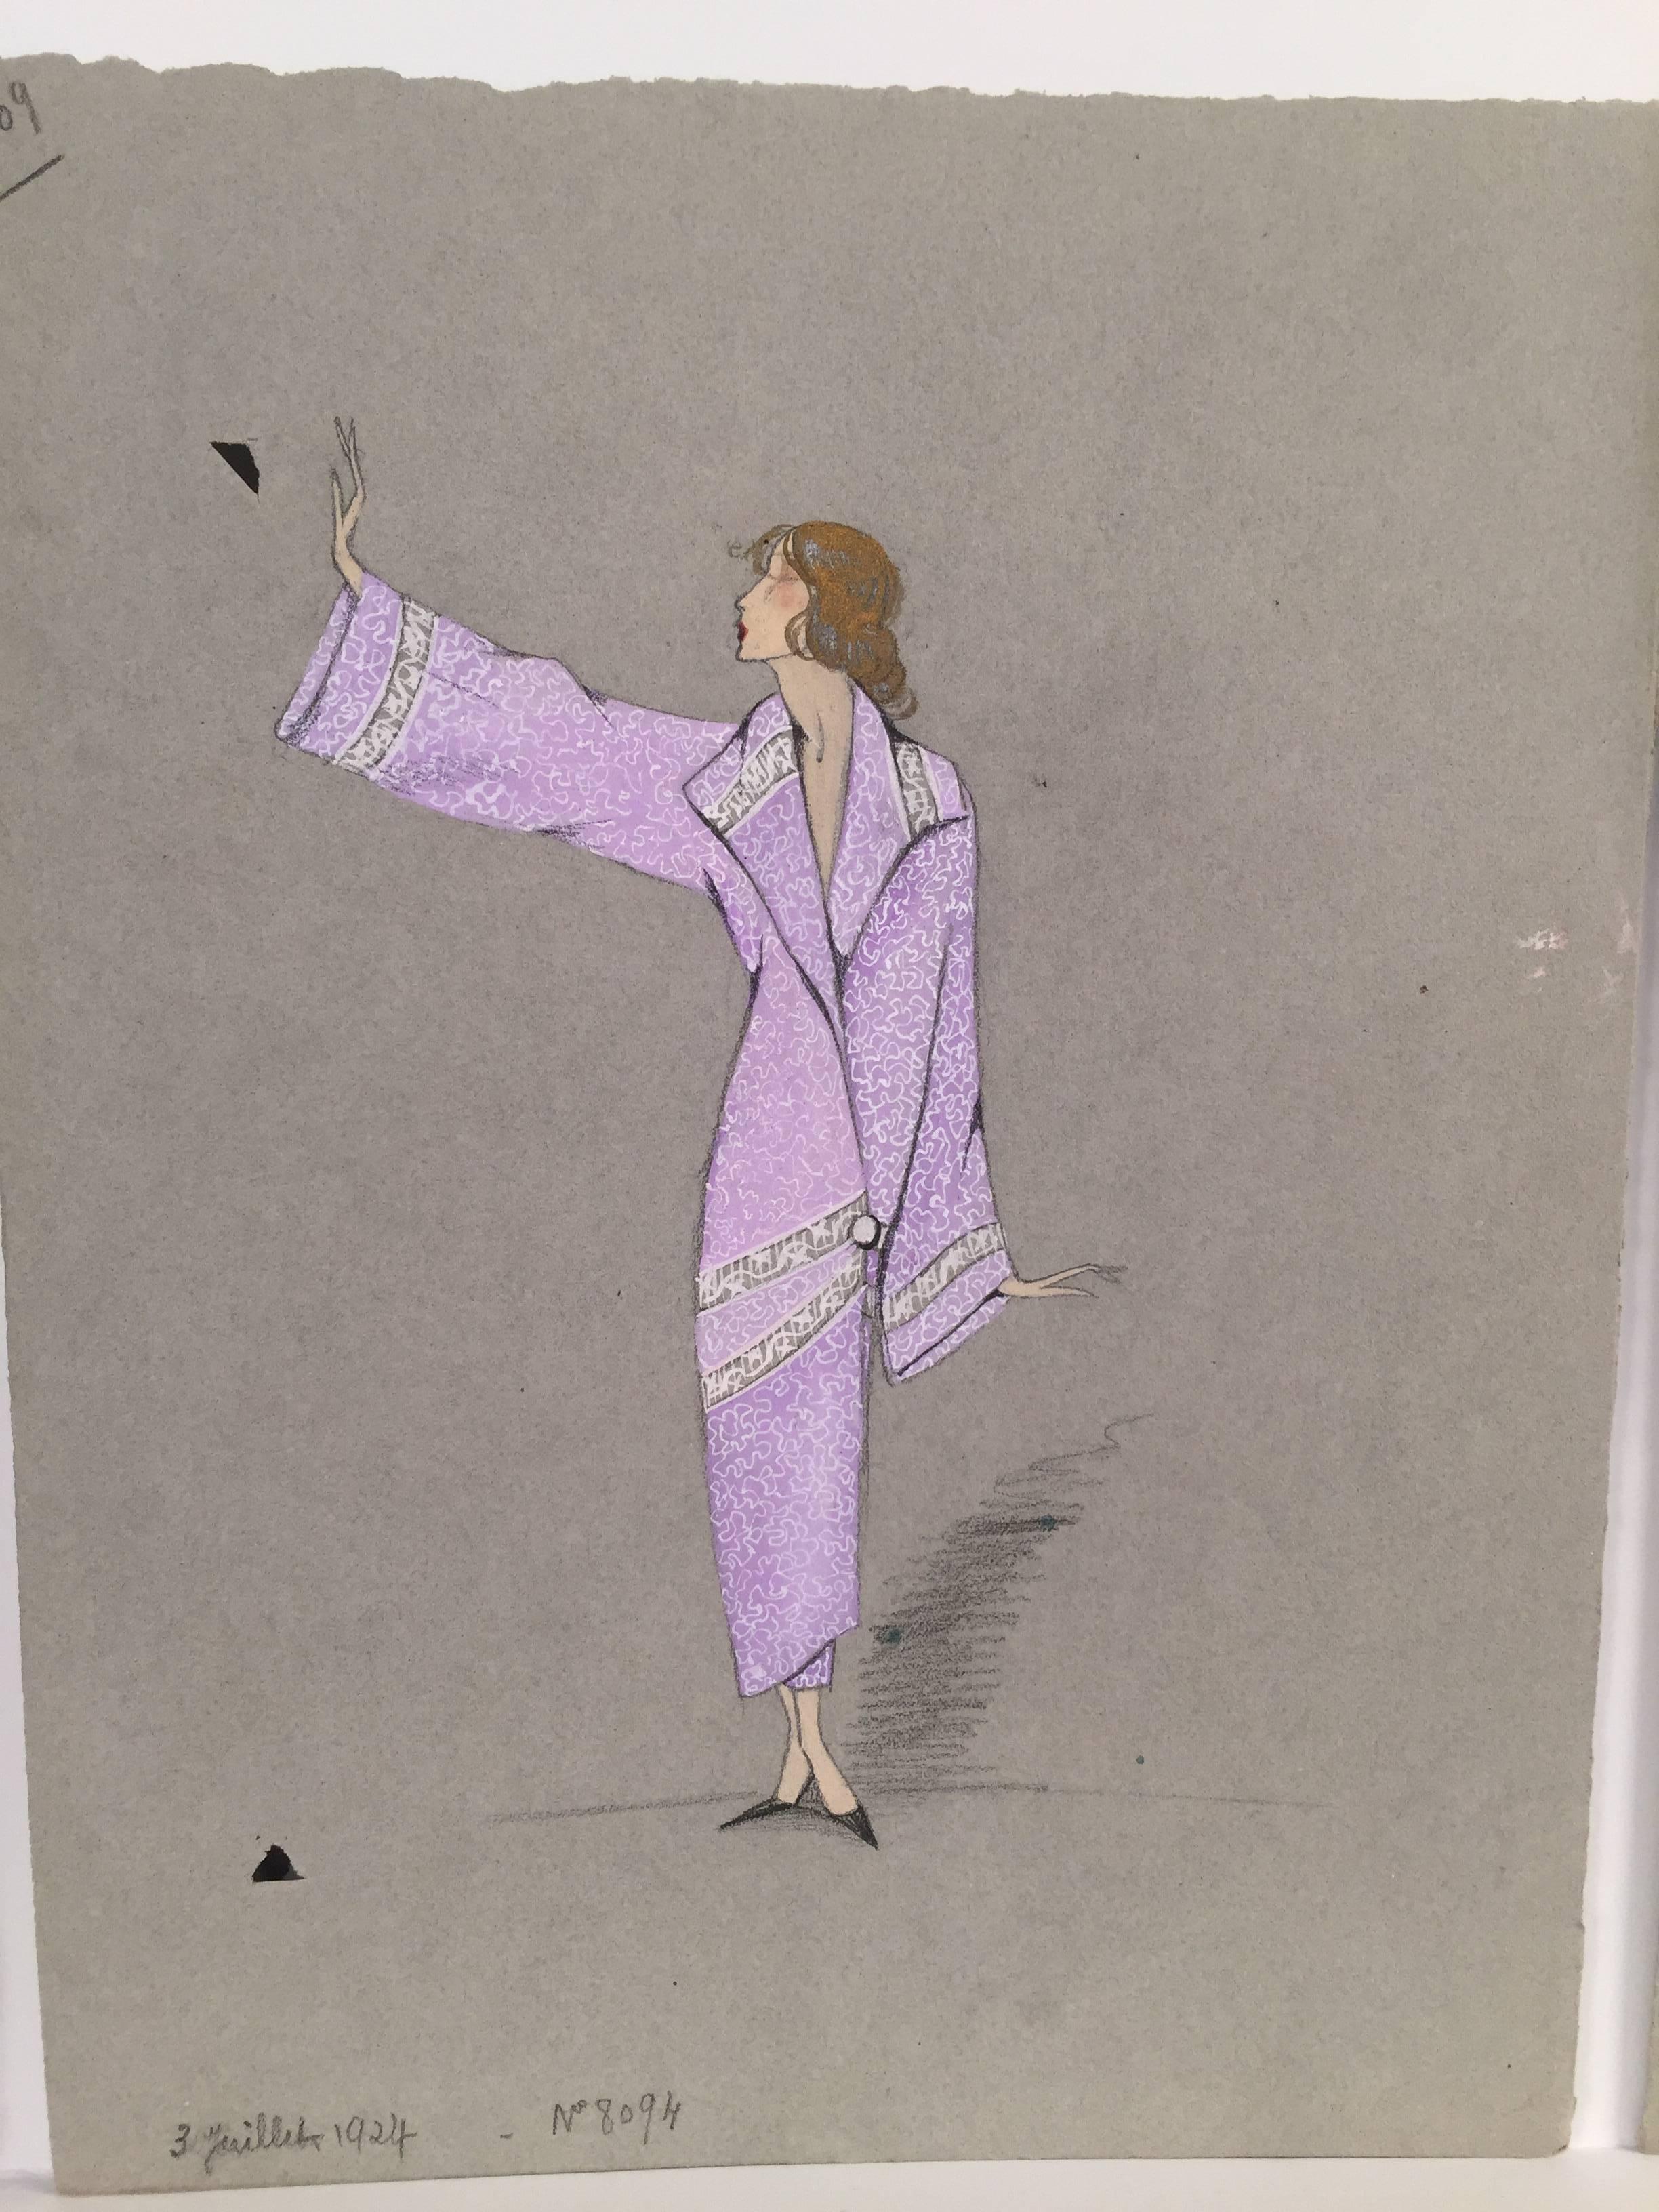 These FOUR pieces are original  one-of-a- kind French fashion stylized illustration in gouache. Pink and Purple, Erte like robe dress.  They come from a portfolio done in 1924 to 1926 in Paris.  They are original designs for a Paris designer's